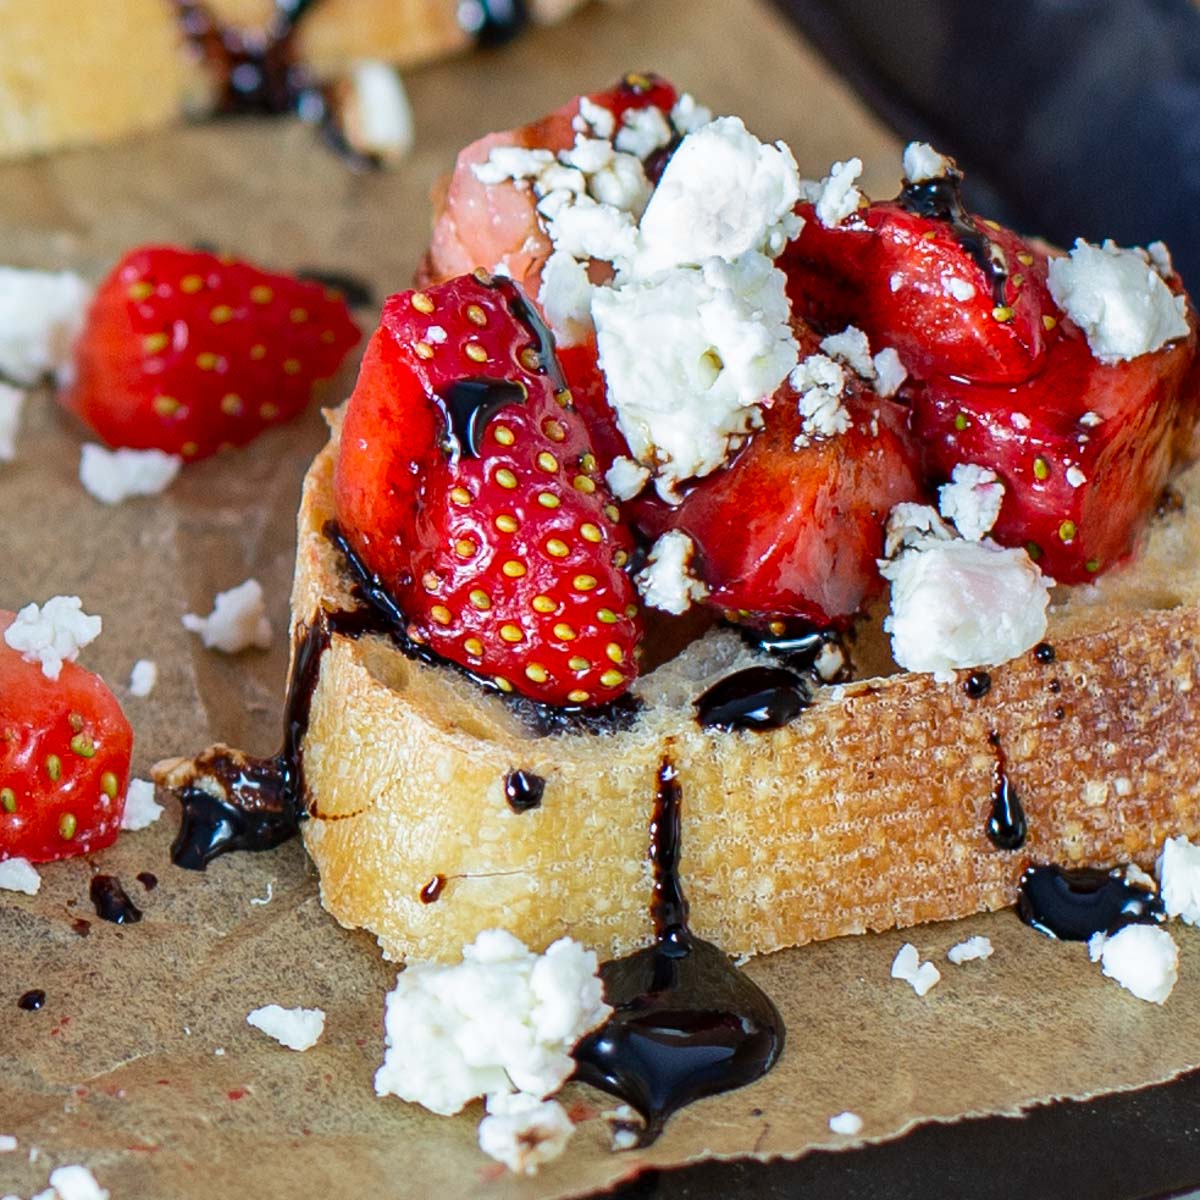 Slices of baguette topped with strawberries, feta cheese drizzled with balsamic glaze.